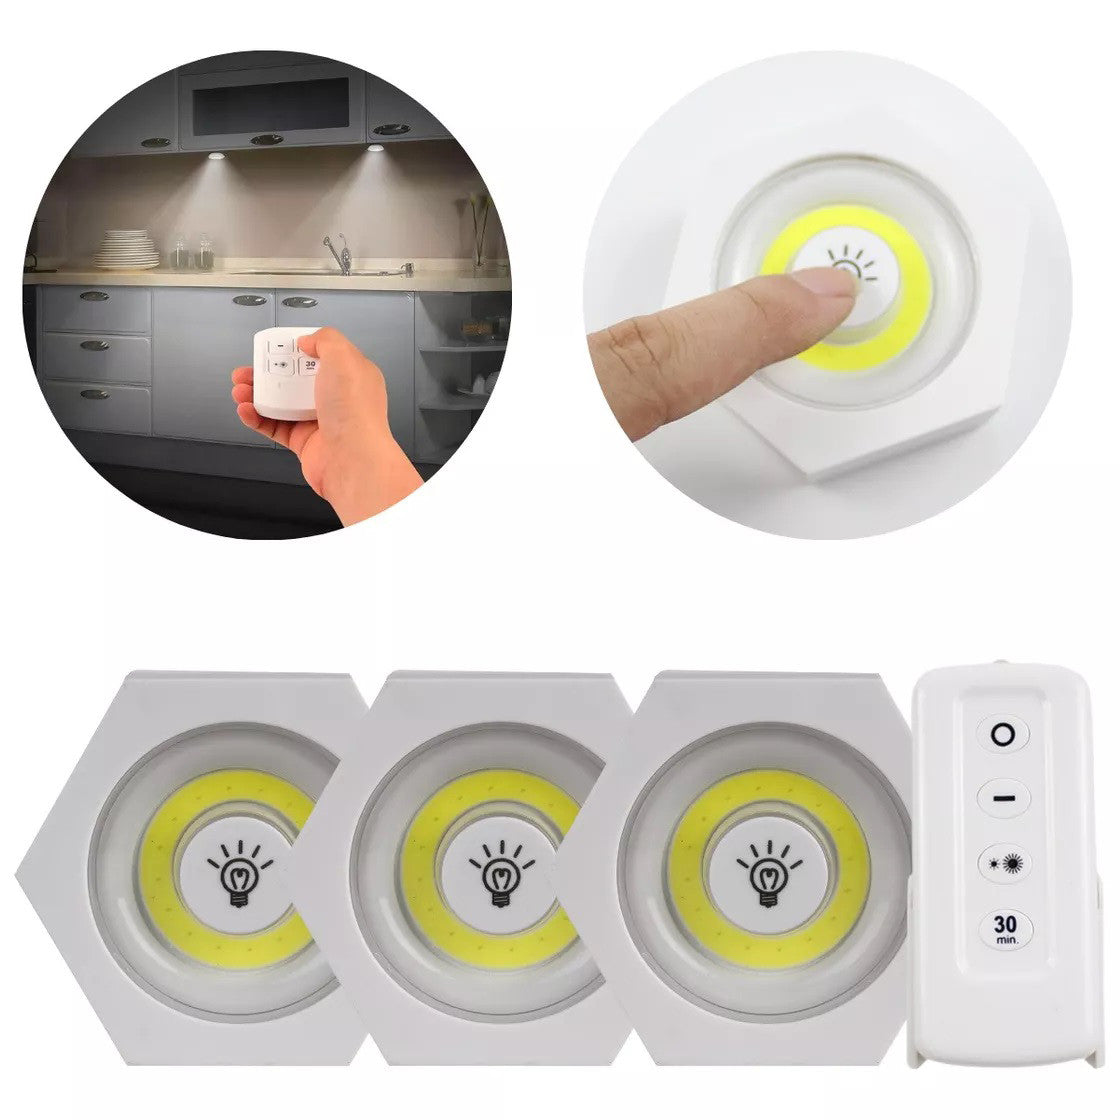 Someone is turning on Dimmable LED Under Cabinet Light with the help of the remote control